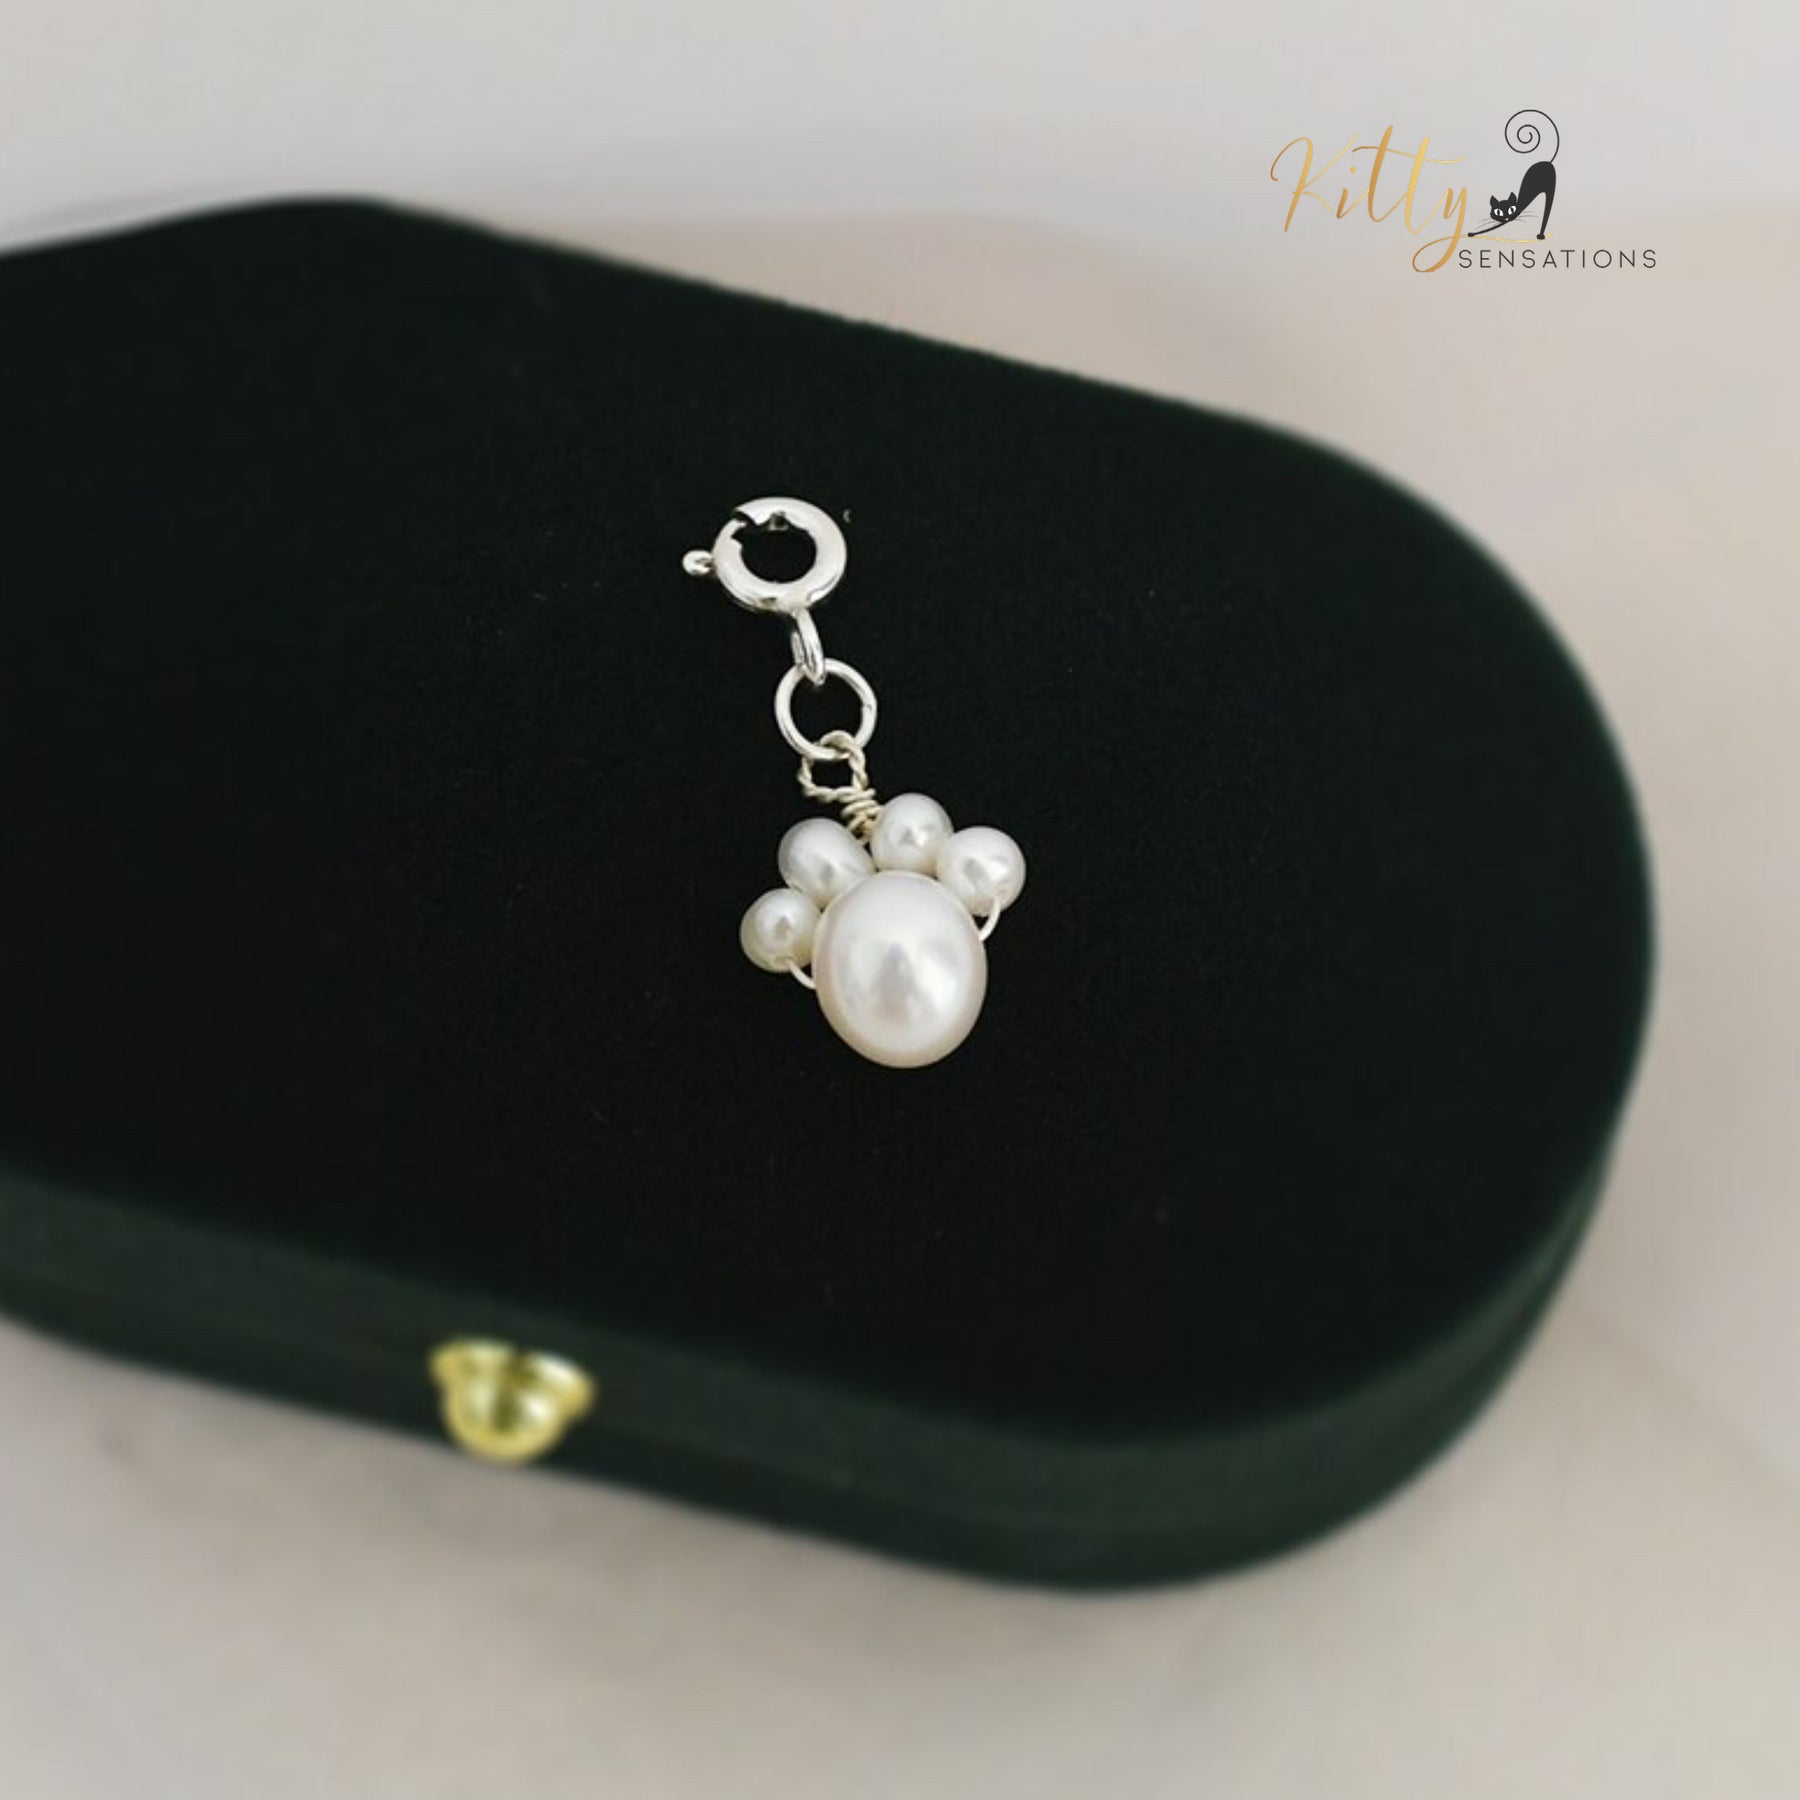 Natural Freshwater Pearls Bracelet with Detachable Kitty Paw Charm - Solid 925 Sterling Silver (Adjustable Length)